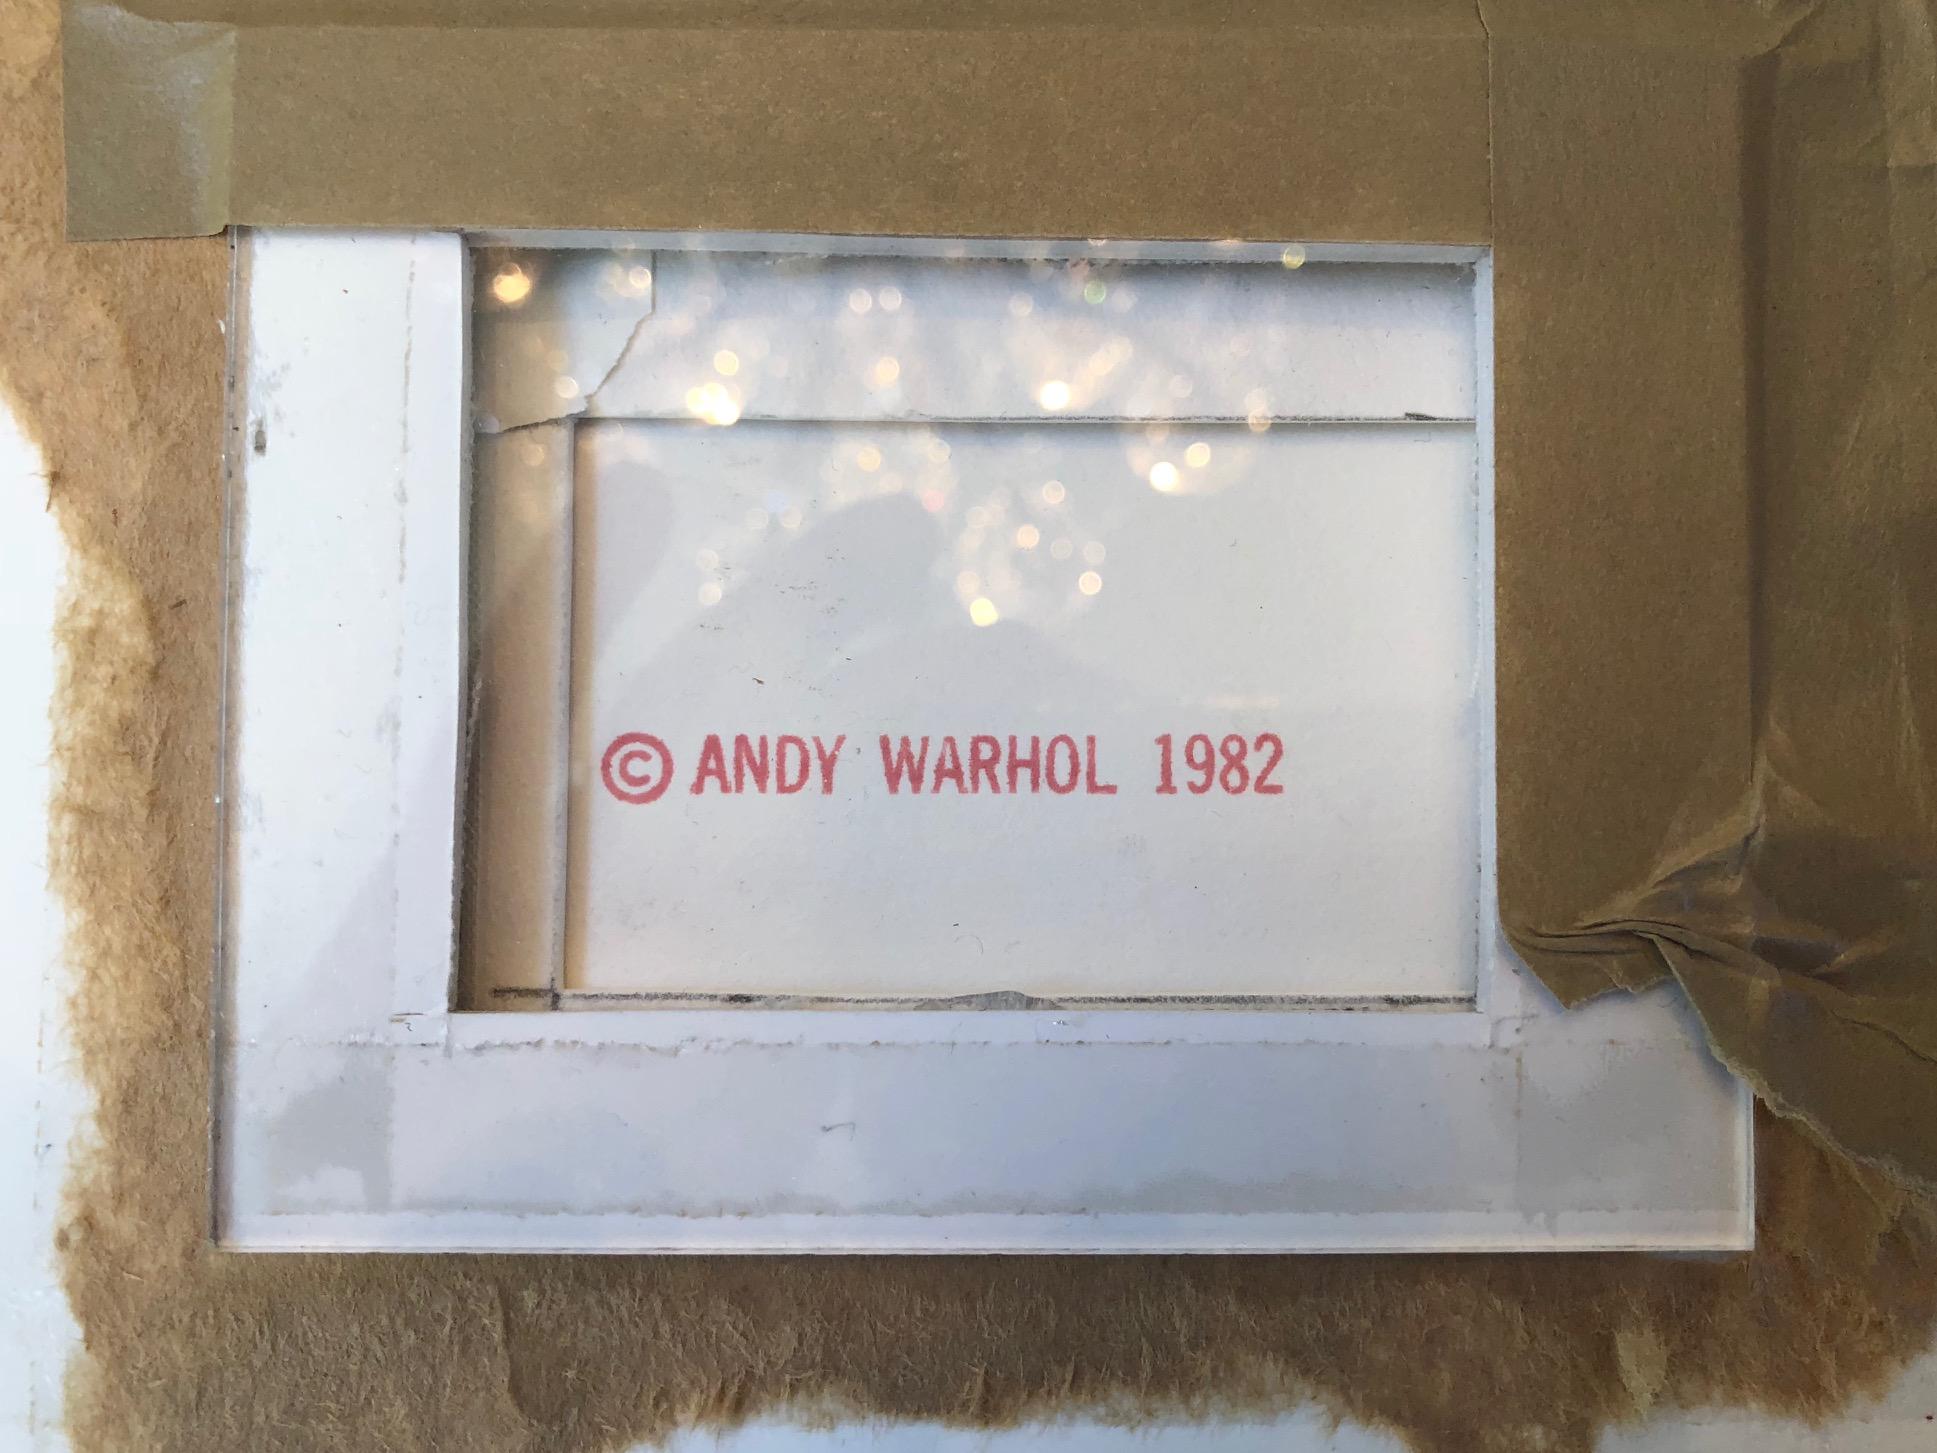 Signed and numbered in pencil lower right. Published by Andy Warhol, New York. Printed by Rupert Jasen Smith, New York. Andy Warhol Prints Catalogue Raisonne 1962-1987 Feldman/Schellmann Fourth Edition F&S II.284.